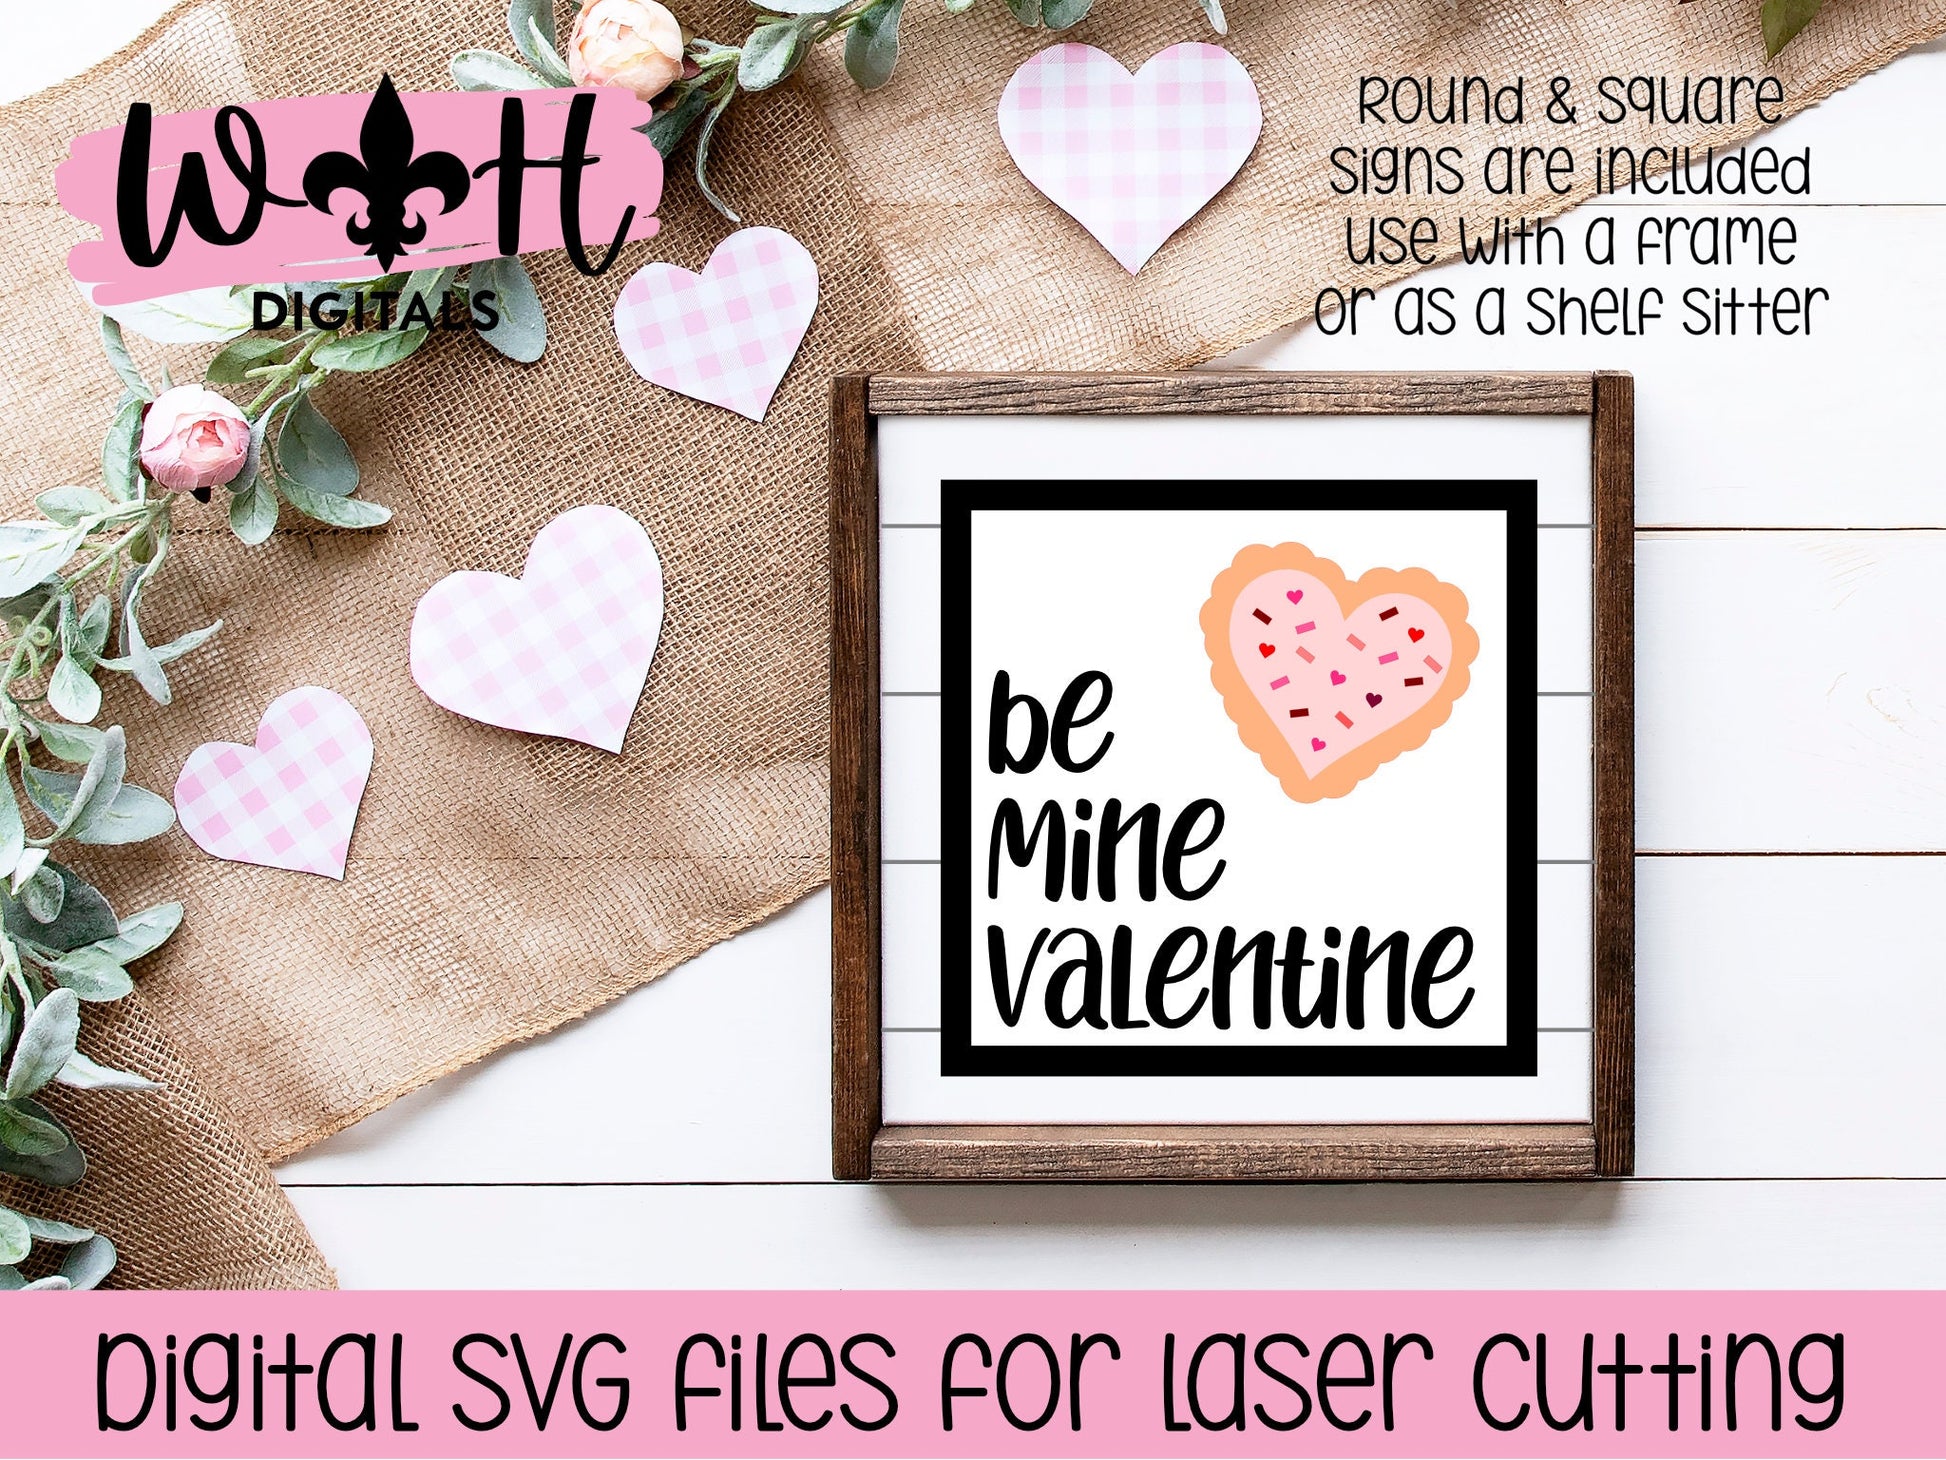 Be Mine Valentine Cookie Shiplap Shelf Sitter - Round and Square Frames - Files for Sign Making - SVG Cut File For Glowforge - Digital File